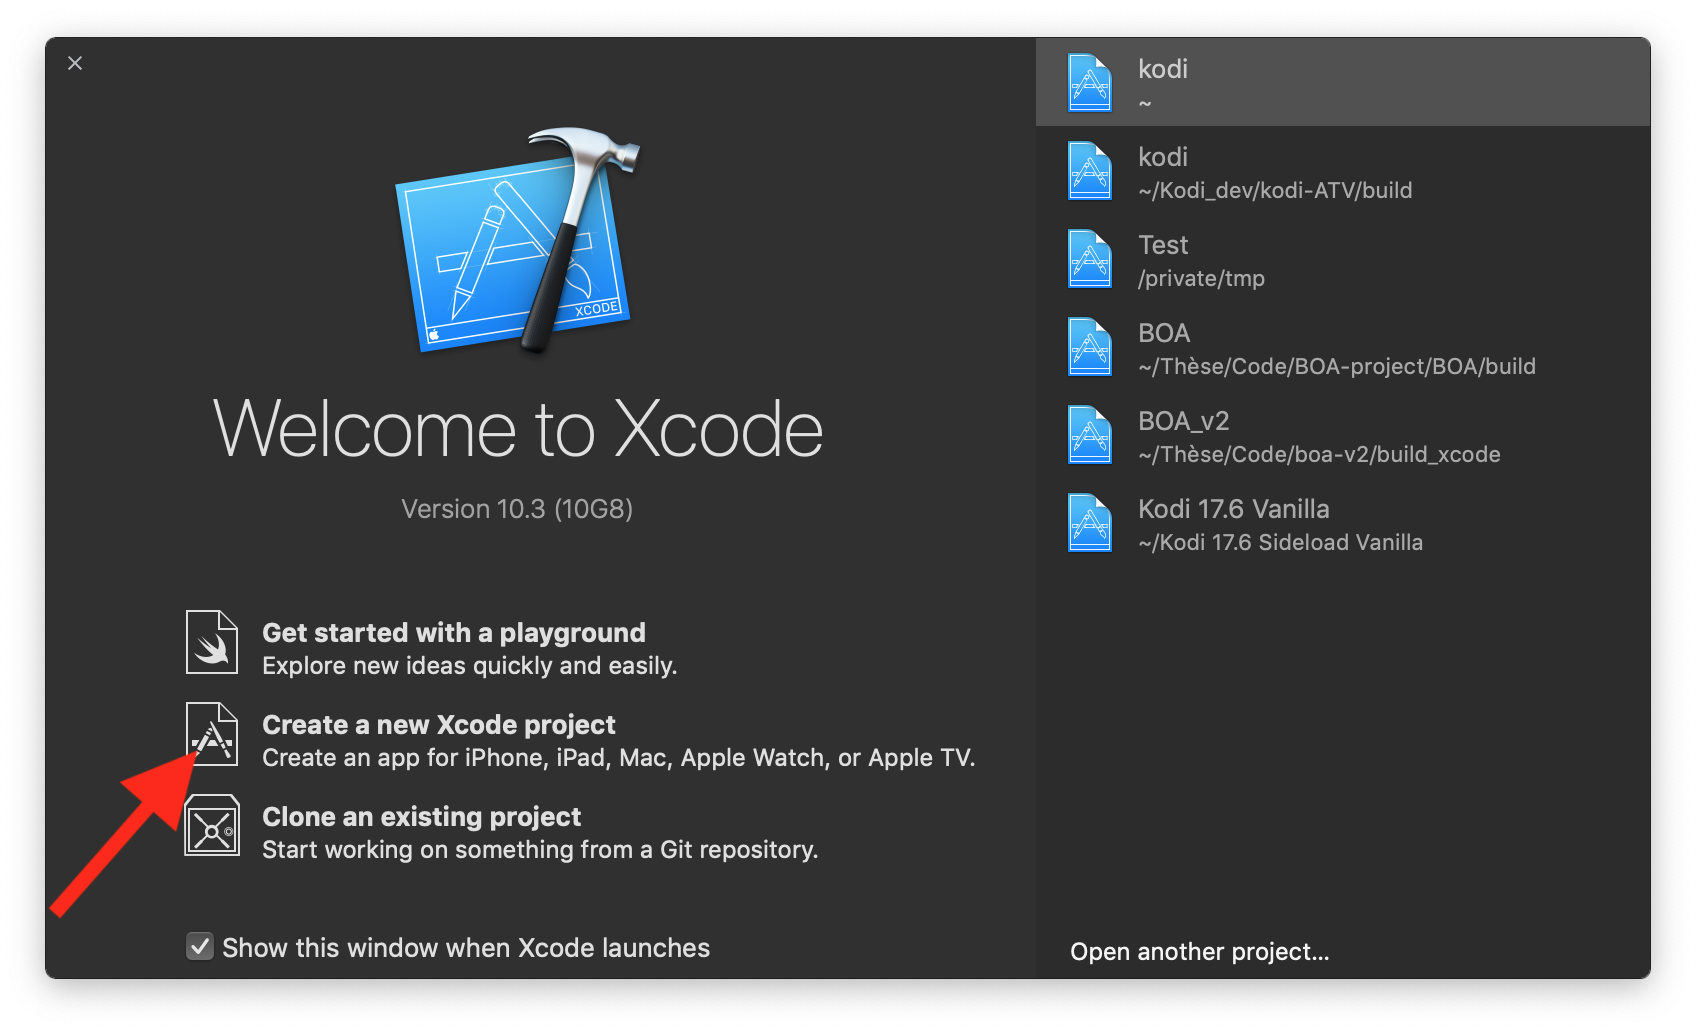 Step 1: Open Xcode and click on "Create a new Xcode project"